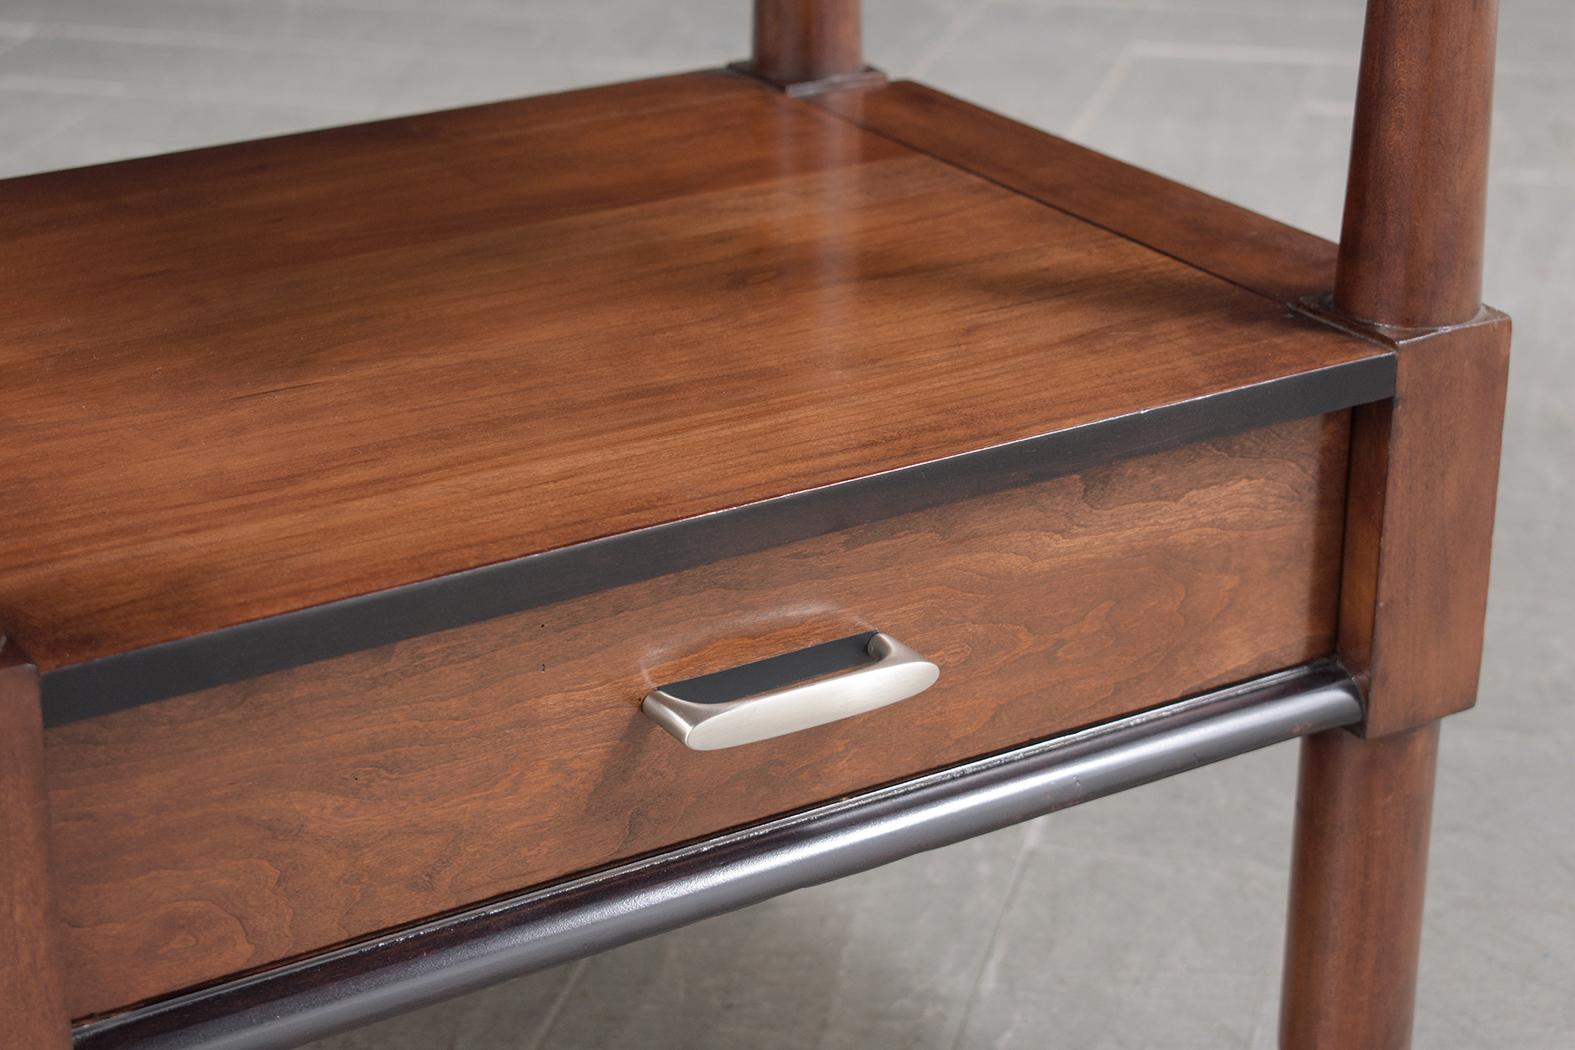 Refined Mid-Century Modern Nightstands: A Blend of Elegance and Functionality 1